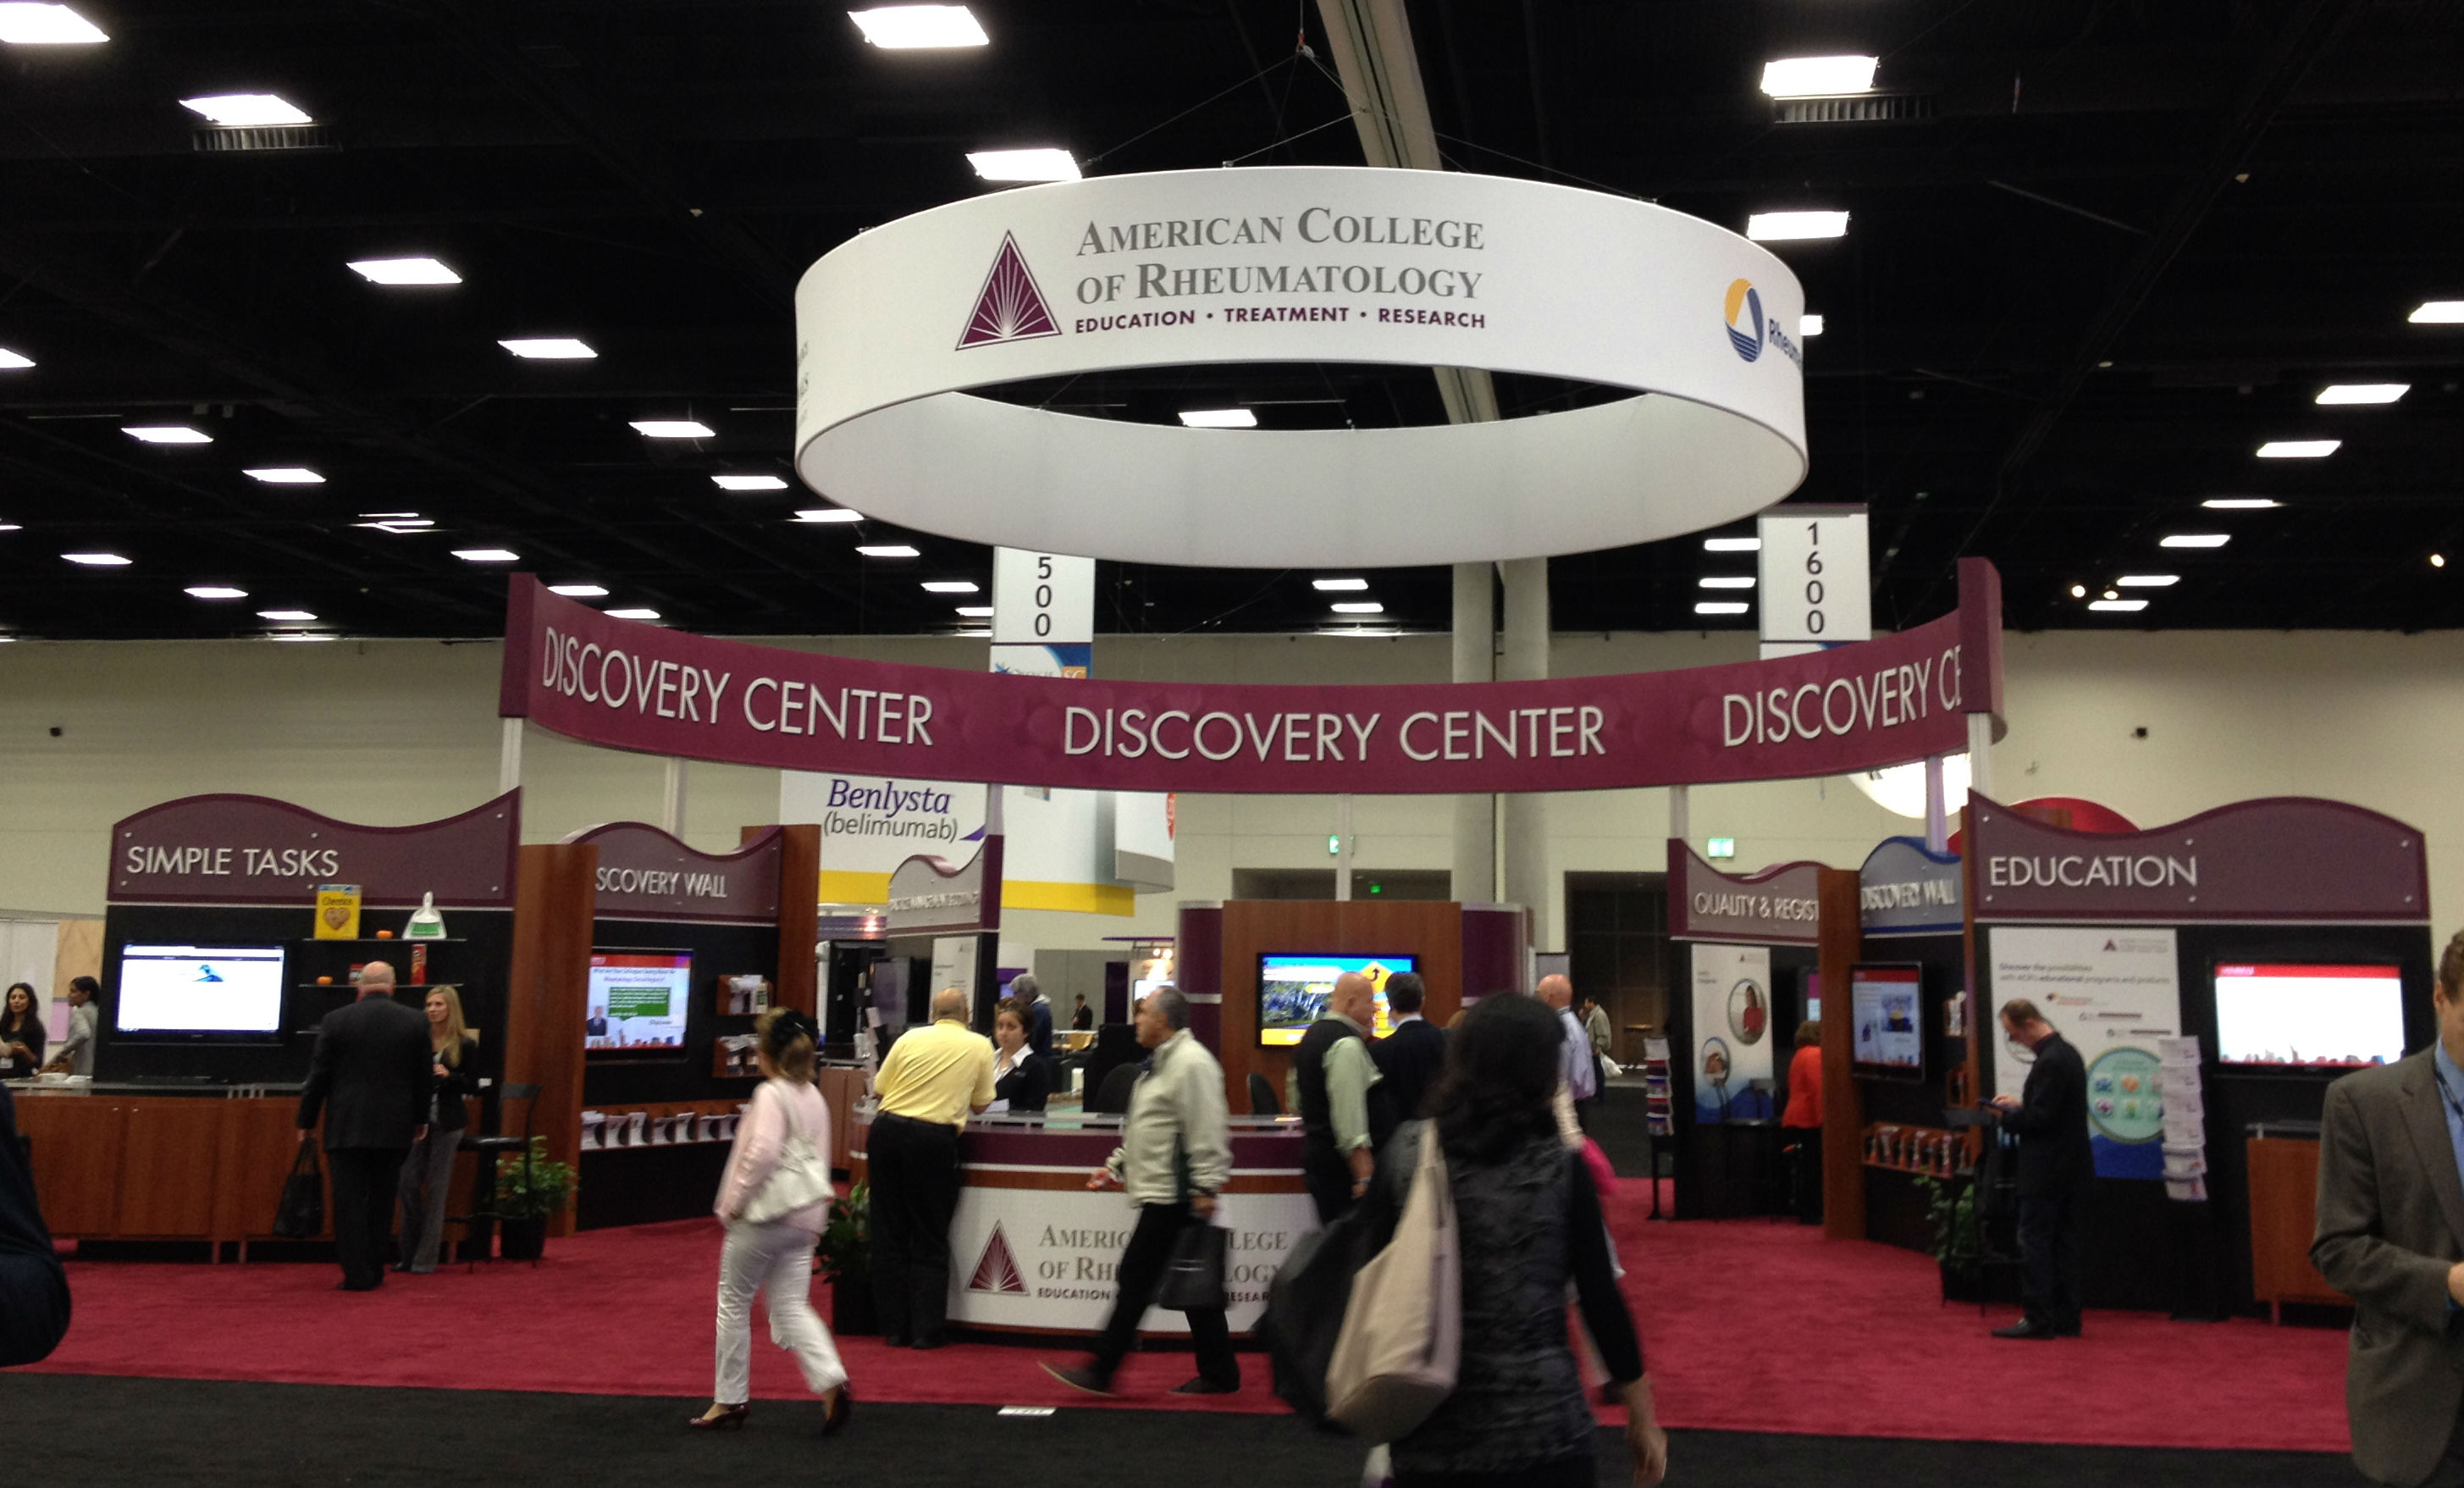 Education Rules the Show at Rheumatologyfocused ACR/ARHP 2013 Annual